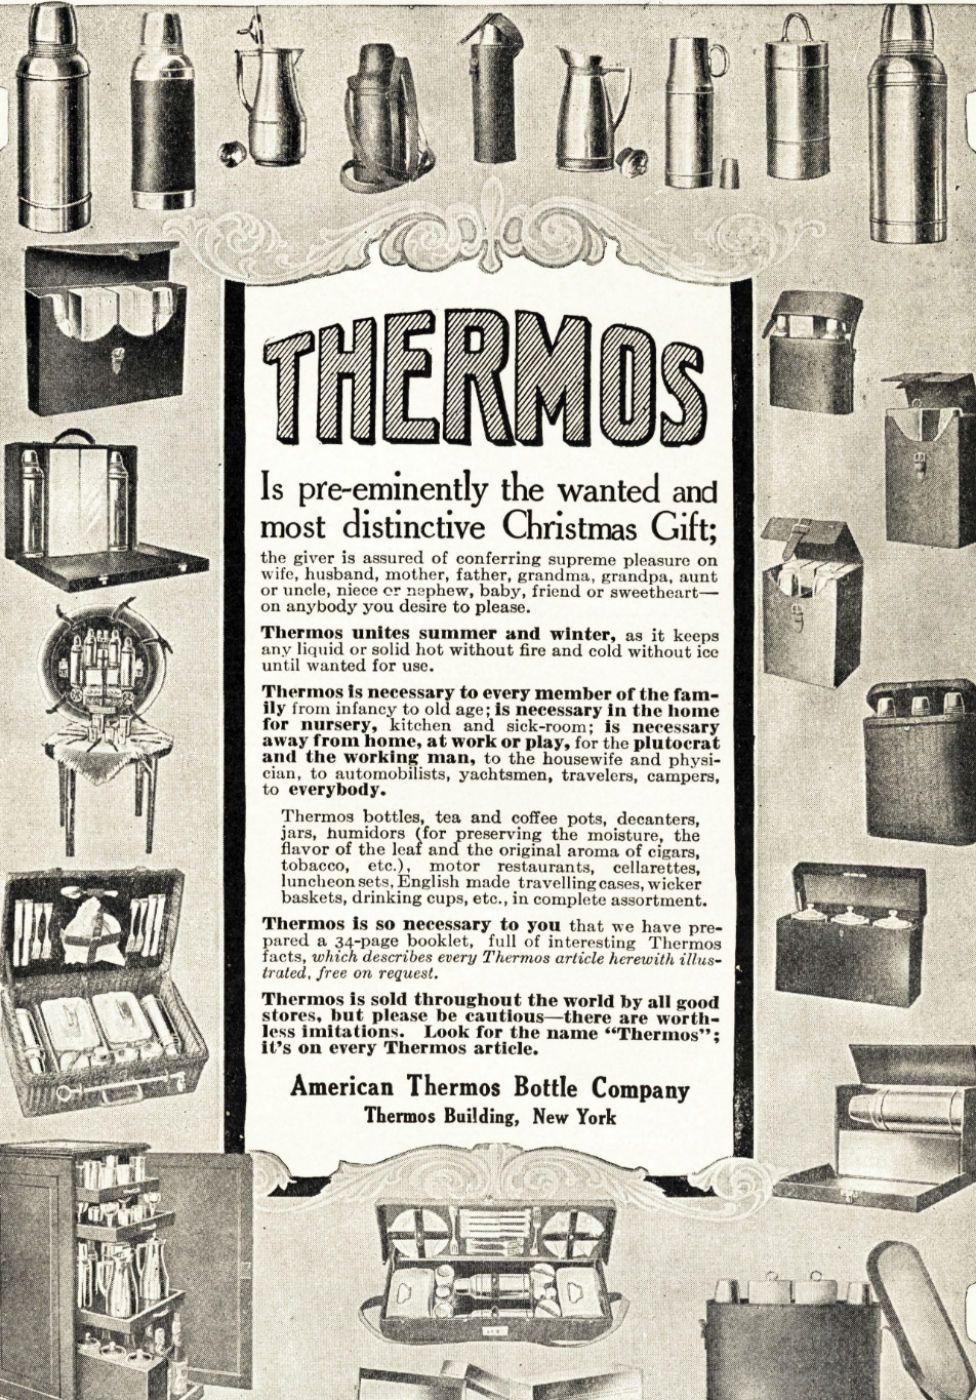 advert for Thermos